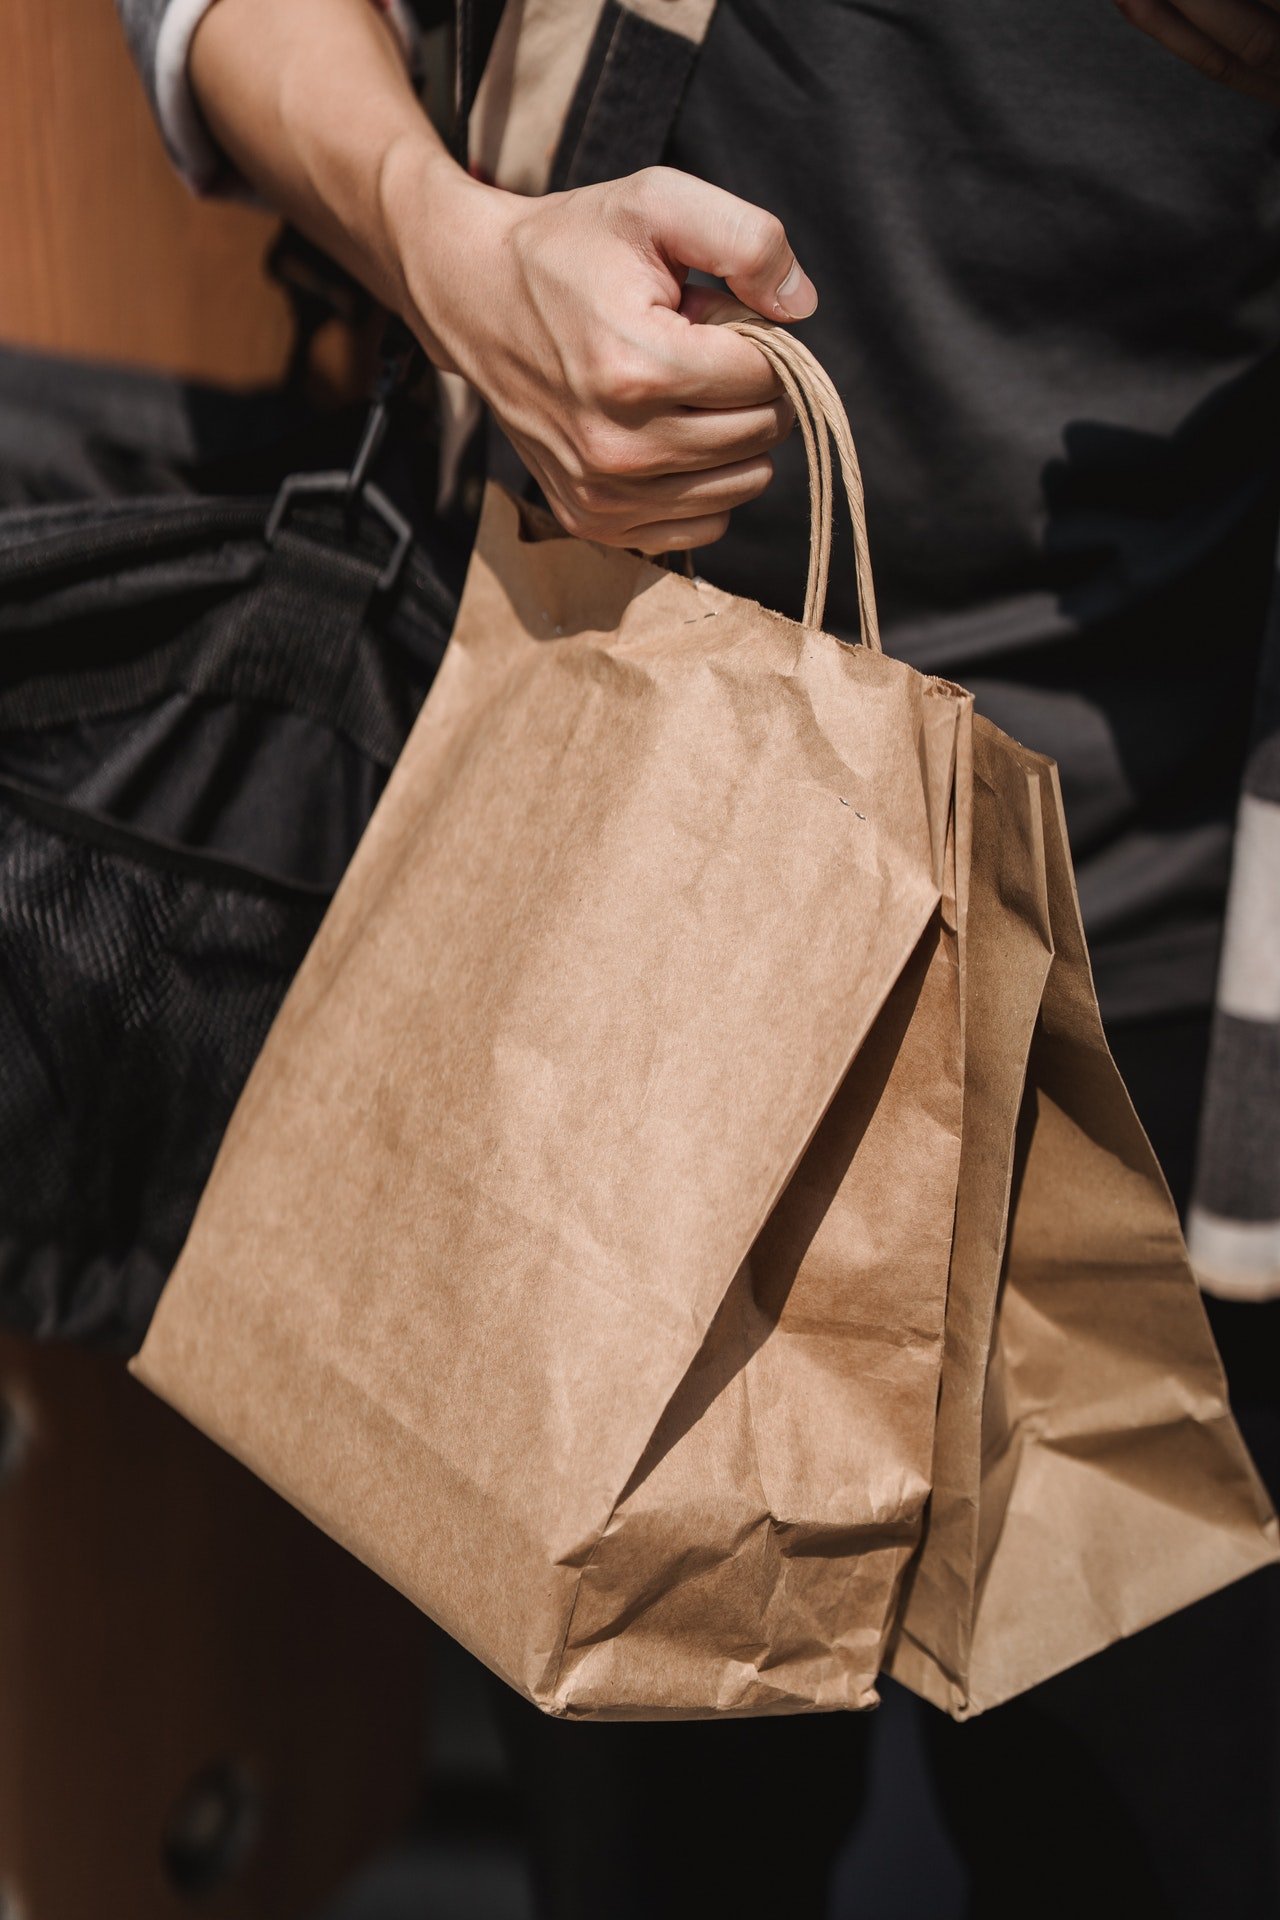 Before the man could dissuade Robert, he was already walking away with both bags of goods, his included | Source: Pexels